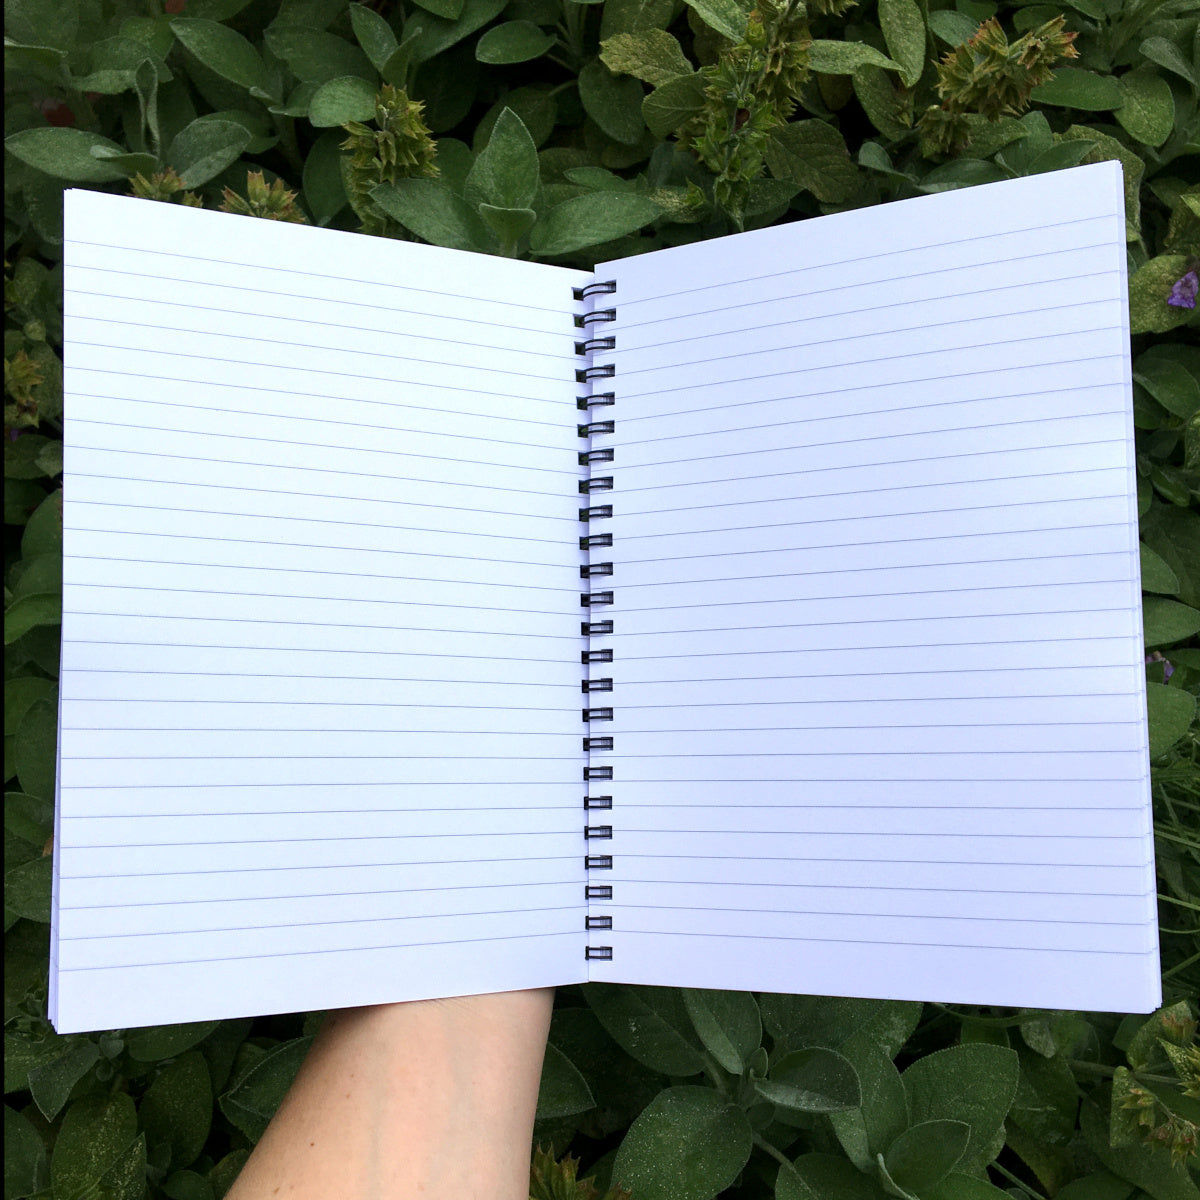 A spiral notebook held open in a hand showing white lined pages.